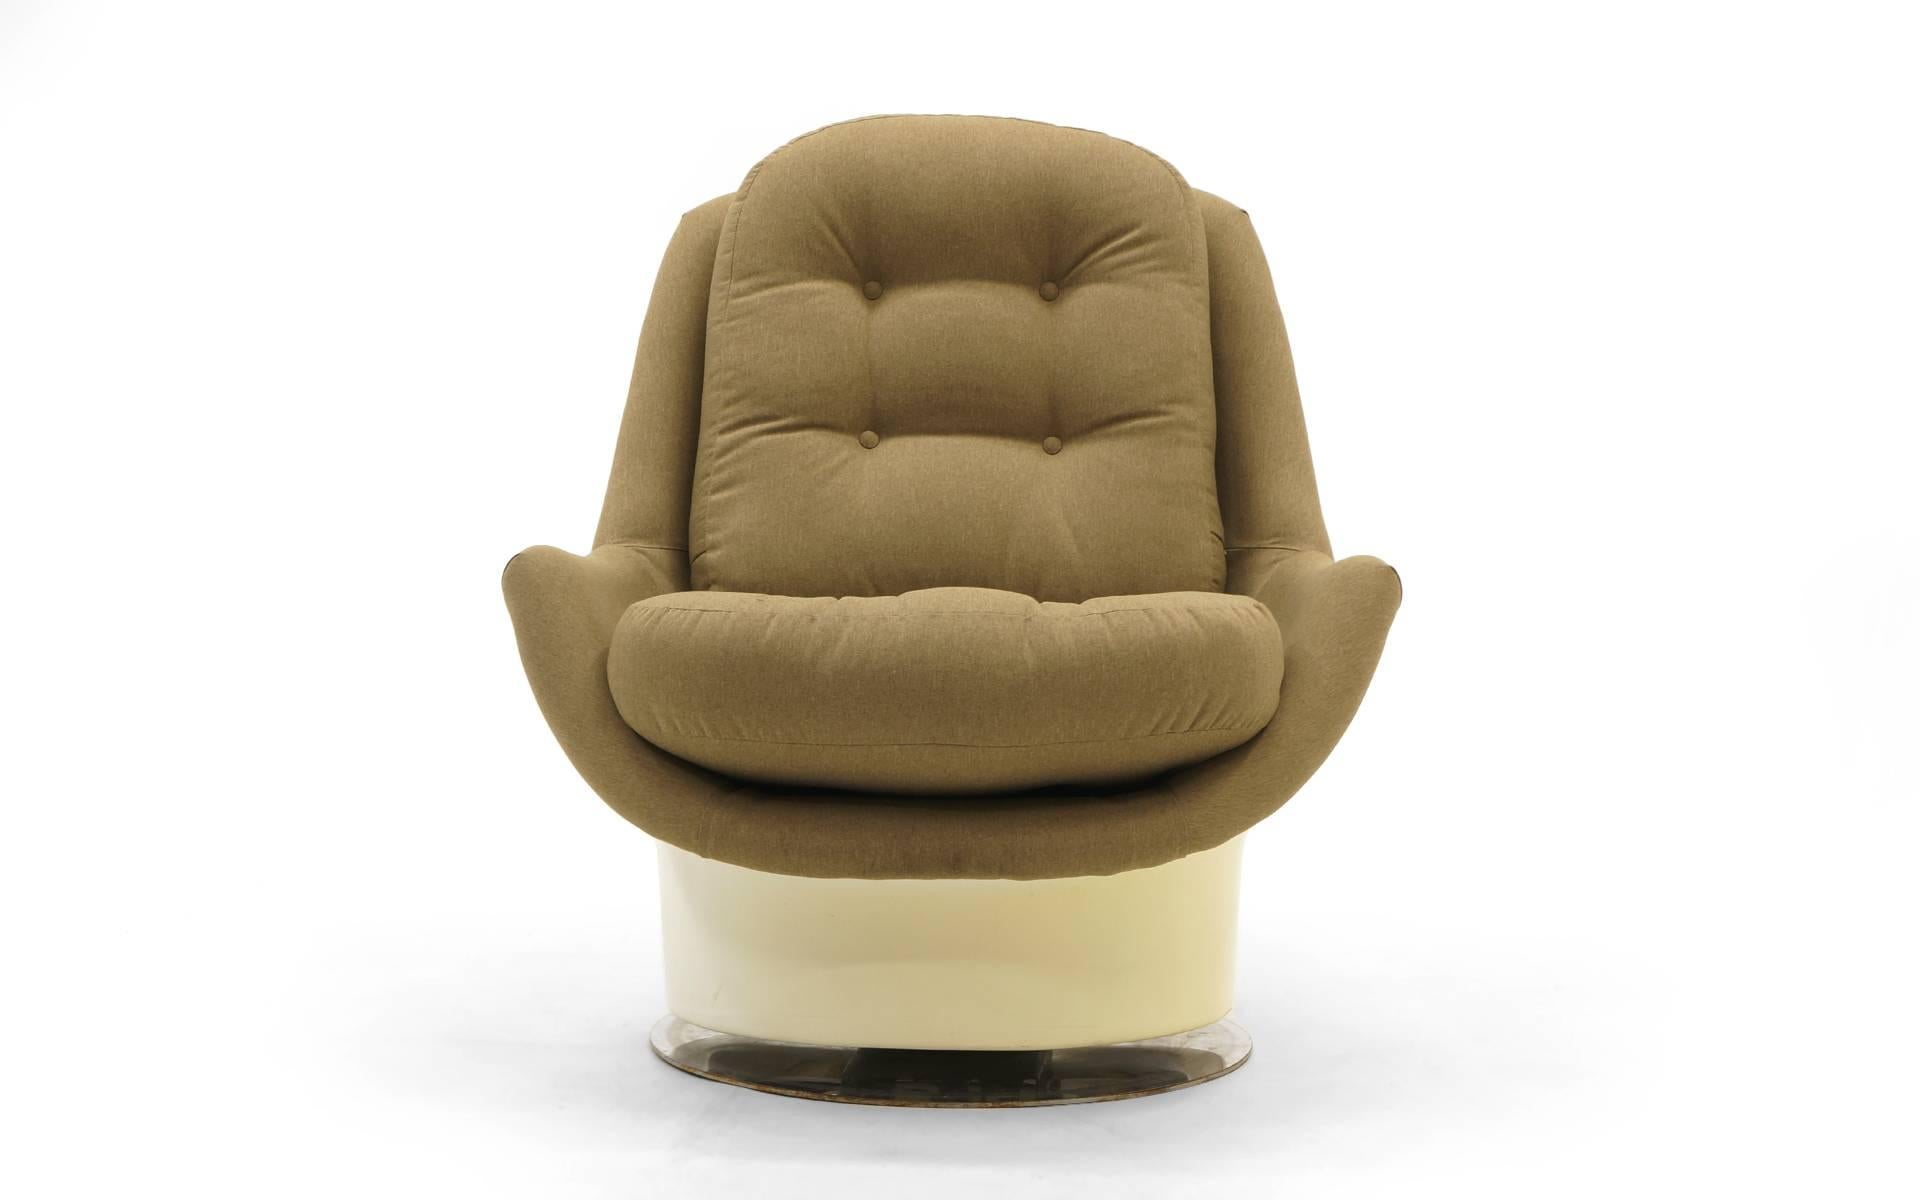 Swivel lounge chair designed by Milo Baughman for Thayer Coggin. Rare design featuring the original fiberglass shell with complete restoration to the upholstery. This is a large, very comfortable chair. The construction is of the highest quality and